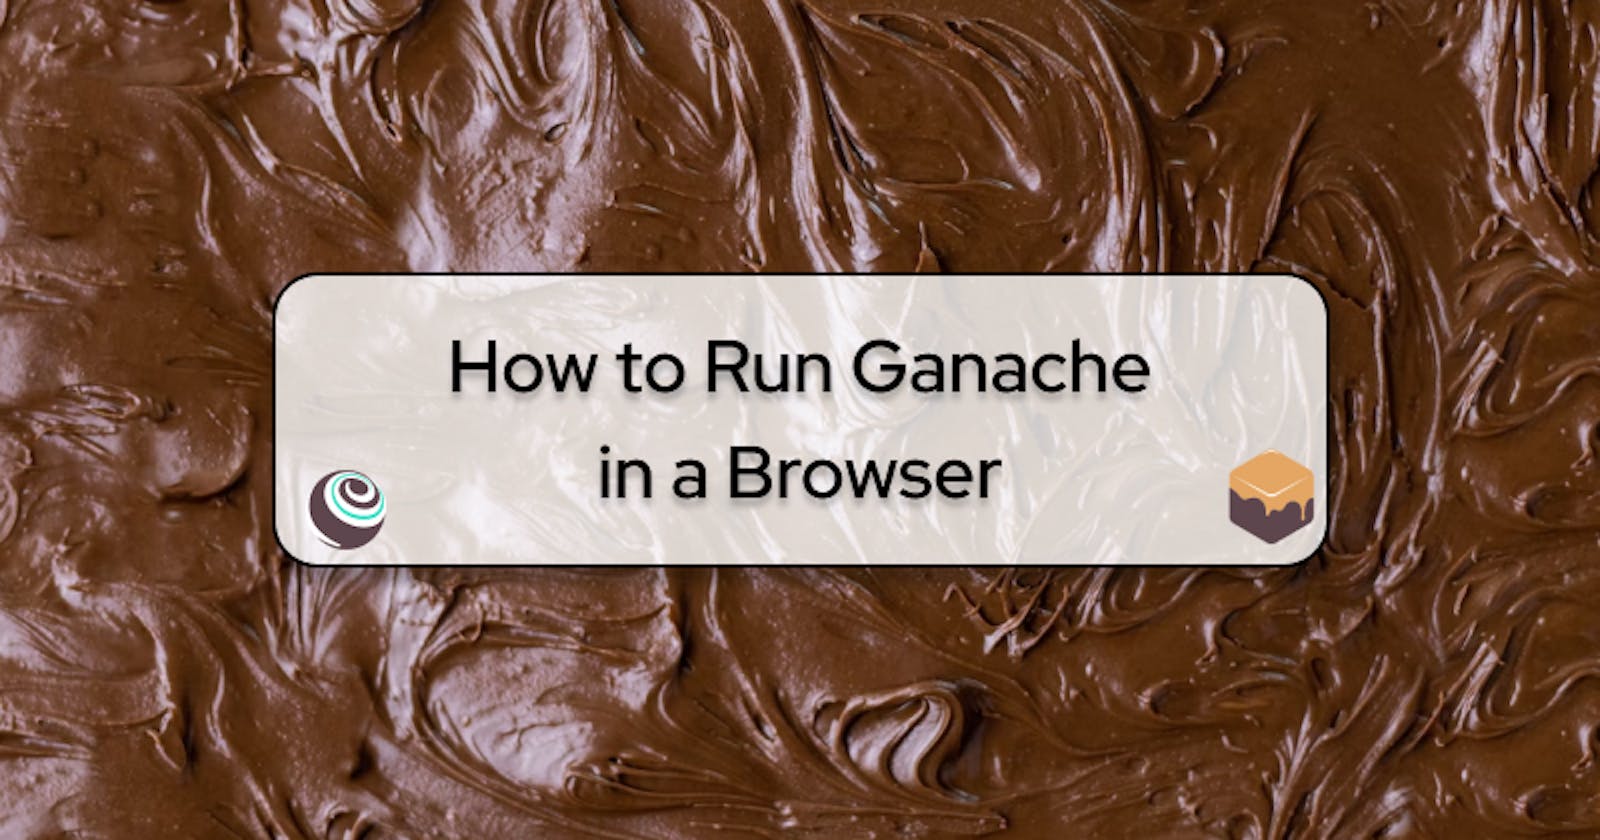 How to Run Ganache in a Browser